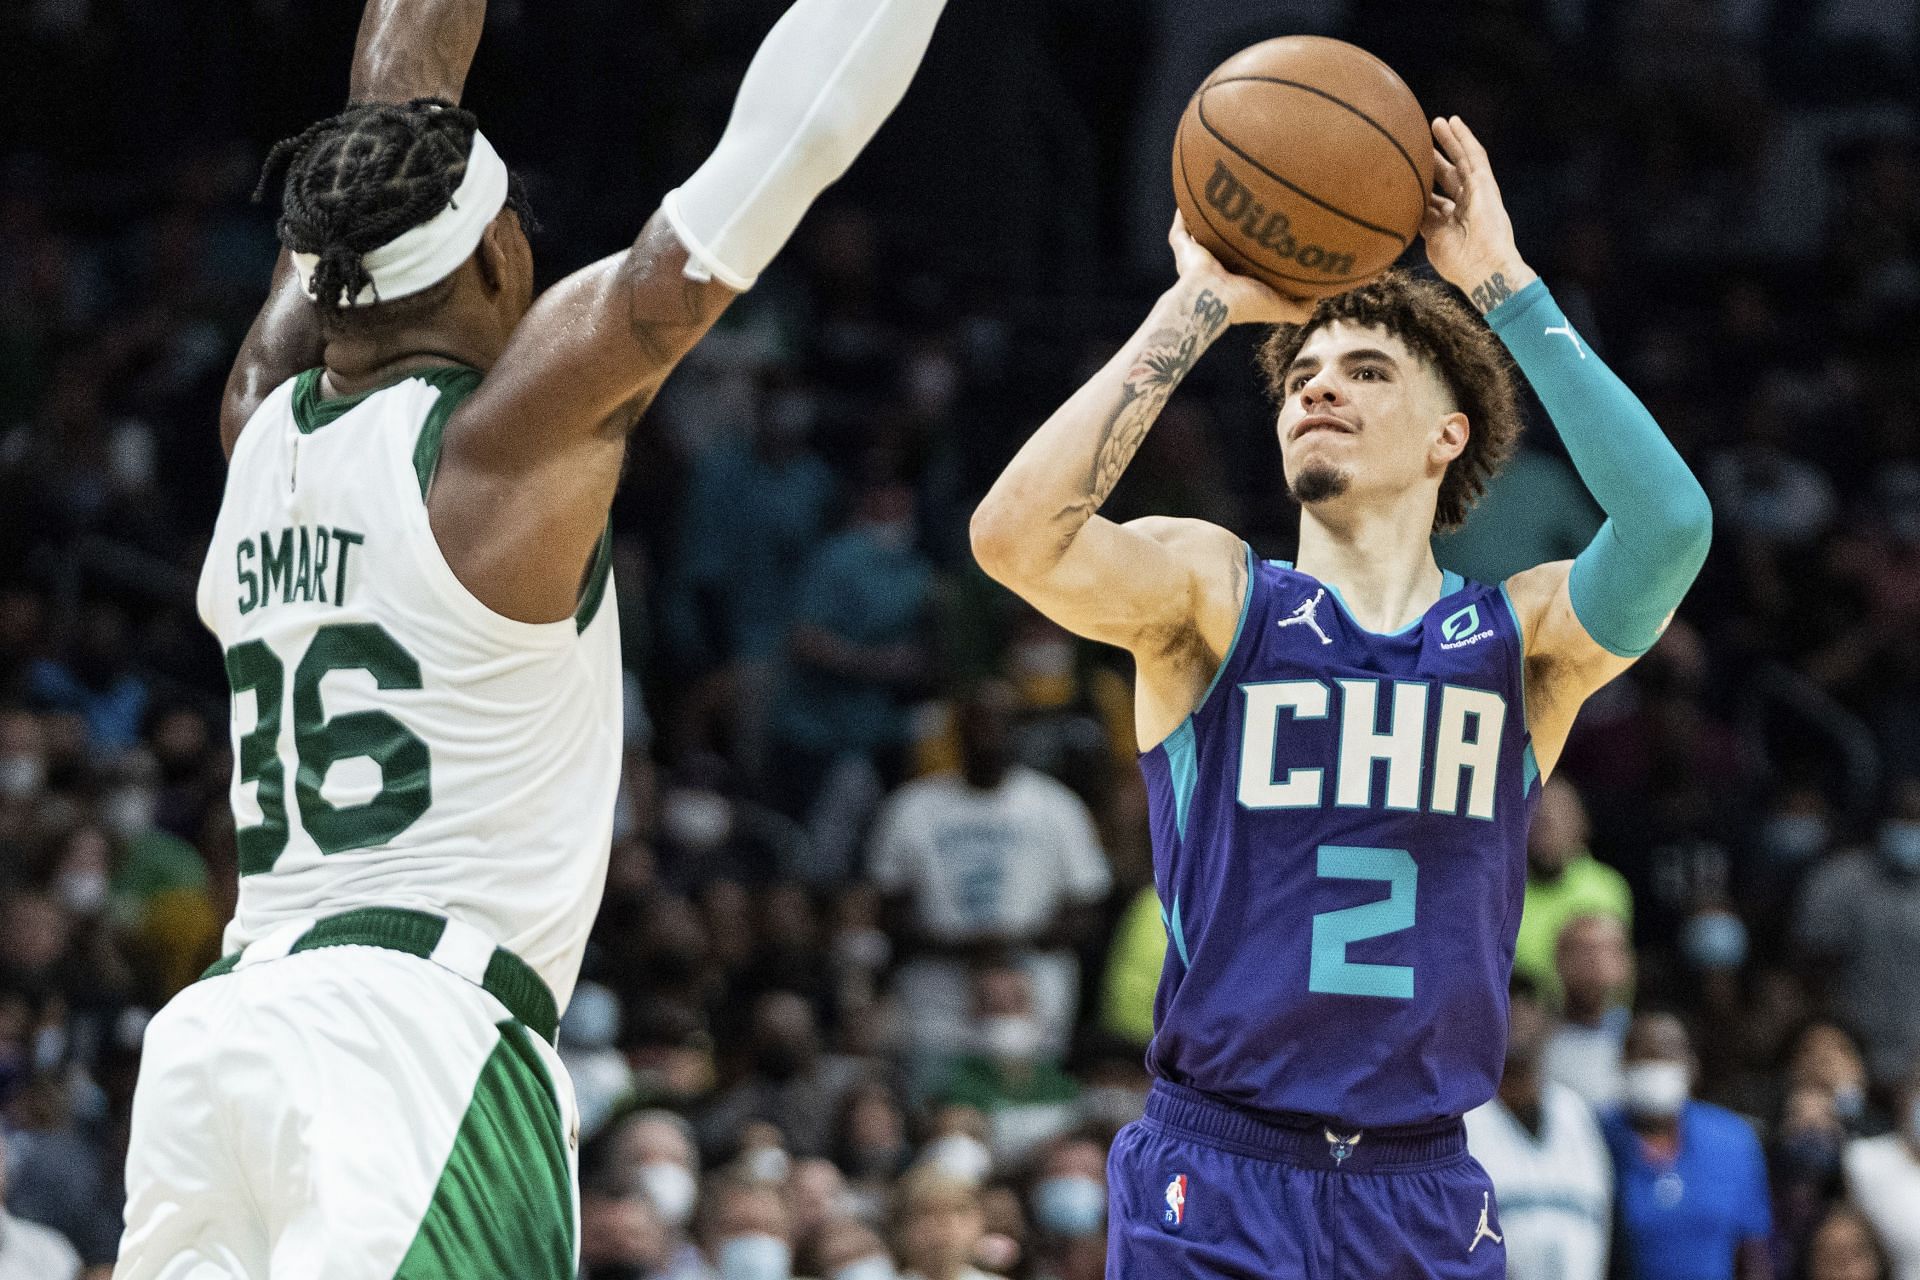 LaMelo Ball of the Charlotte Hornets attempts to shoot against Marcus Smart of the Boston Celtics. [Photo: MassLive.com]